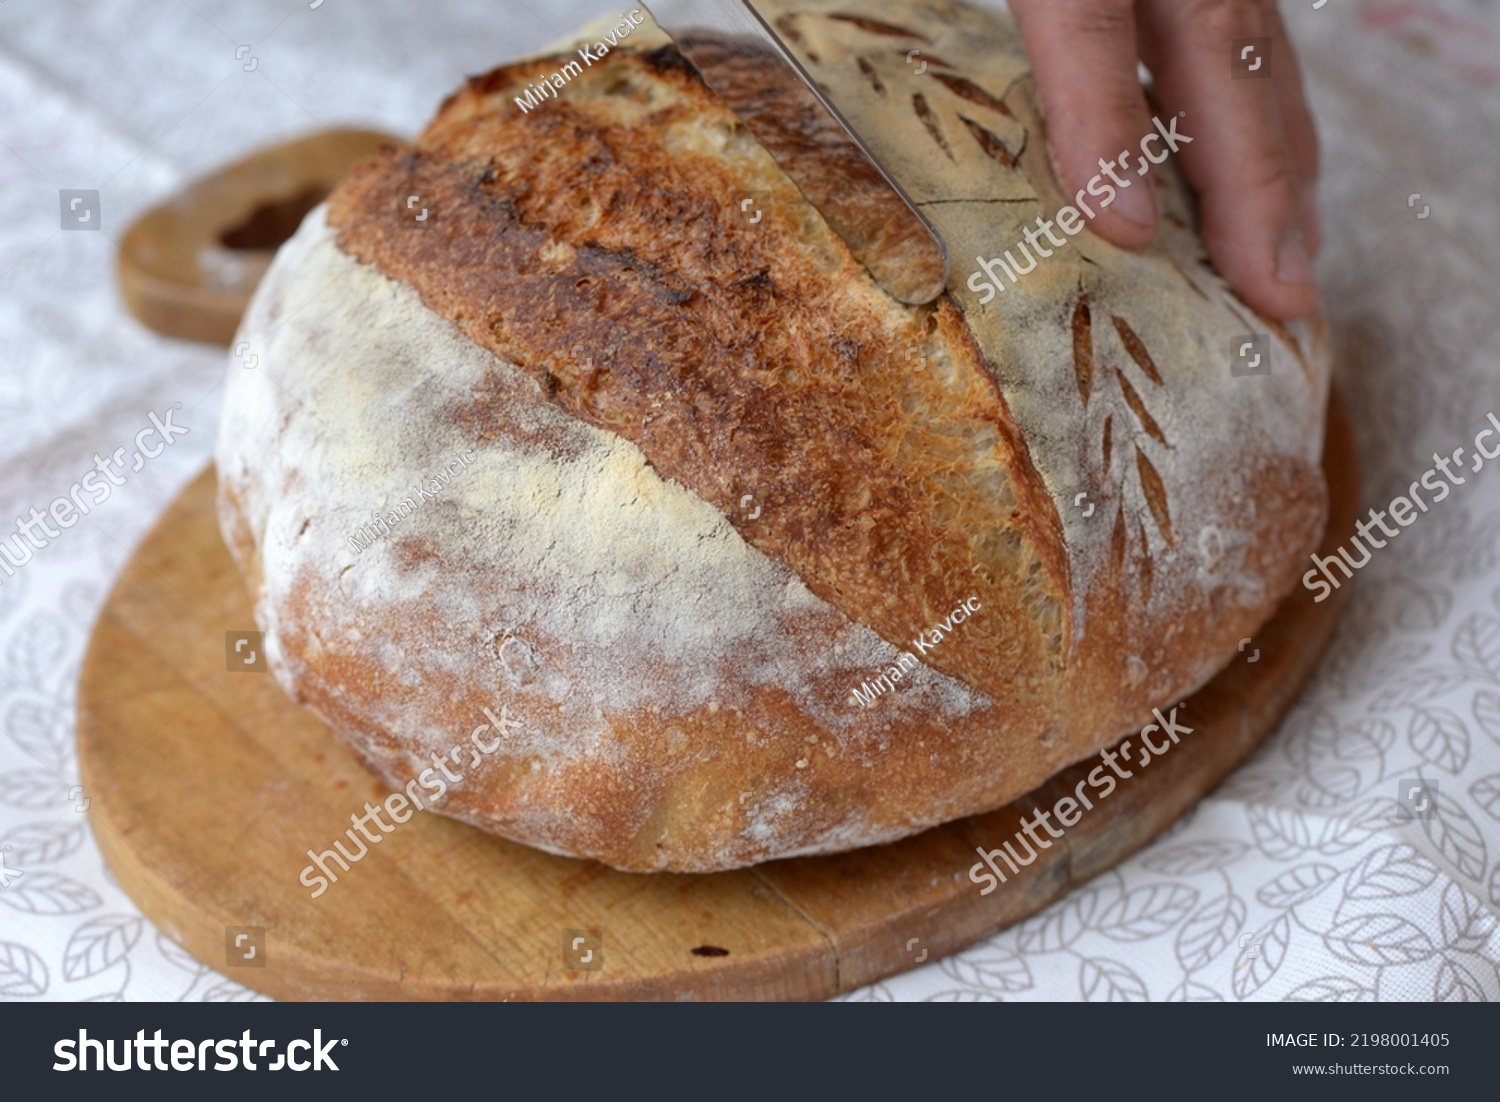 Baker slicing fresh baked wheat bread loaf. Loaf of crusty sourdough bread with wholegrain flour and seeds. Baking holding knife to cut wholegrain bread on half. Crusty bread with hand scoring. #2198001405